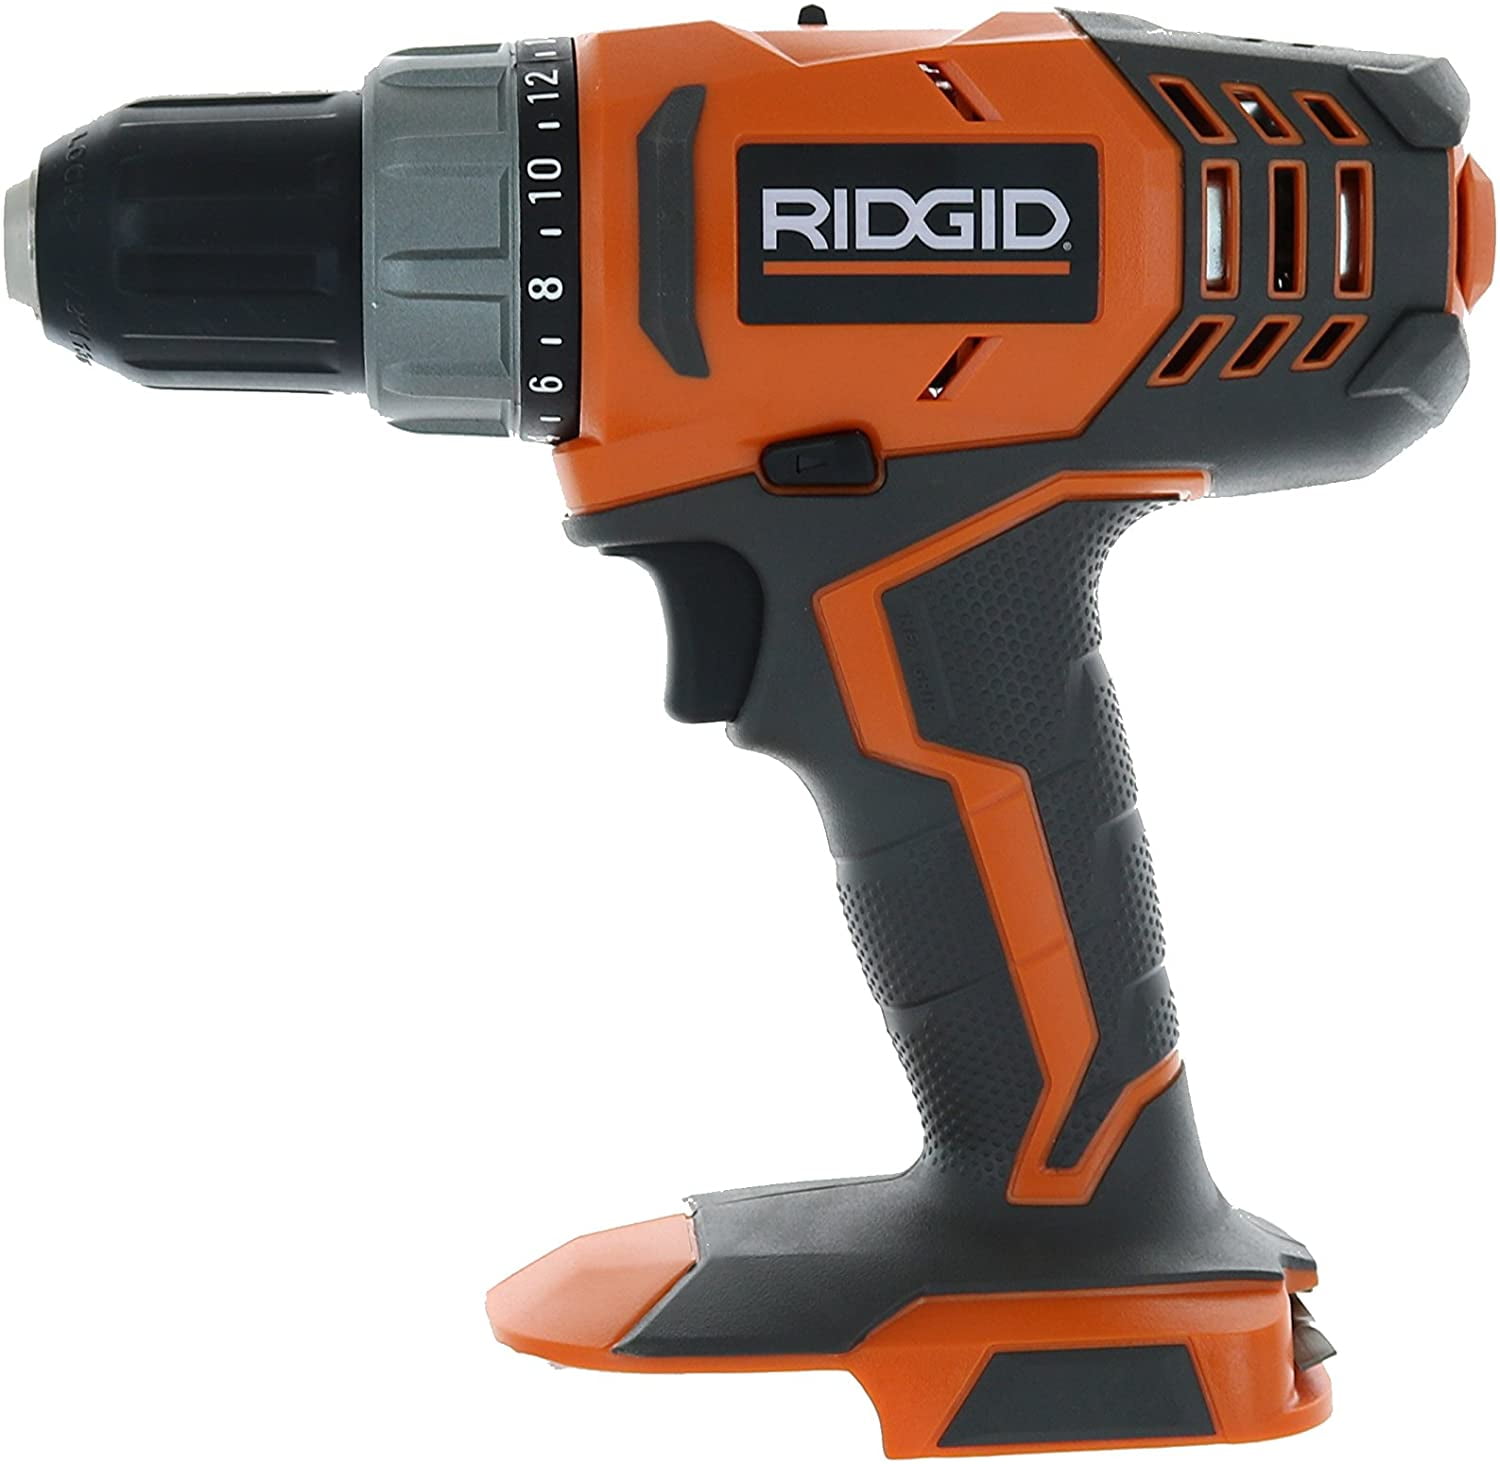 RIDGID R860052 18V Lithium Ion 1/2 inch Cordless Drill/Driver Kit for sale online 